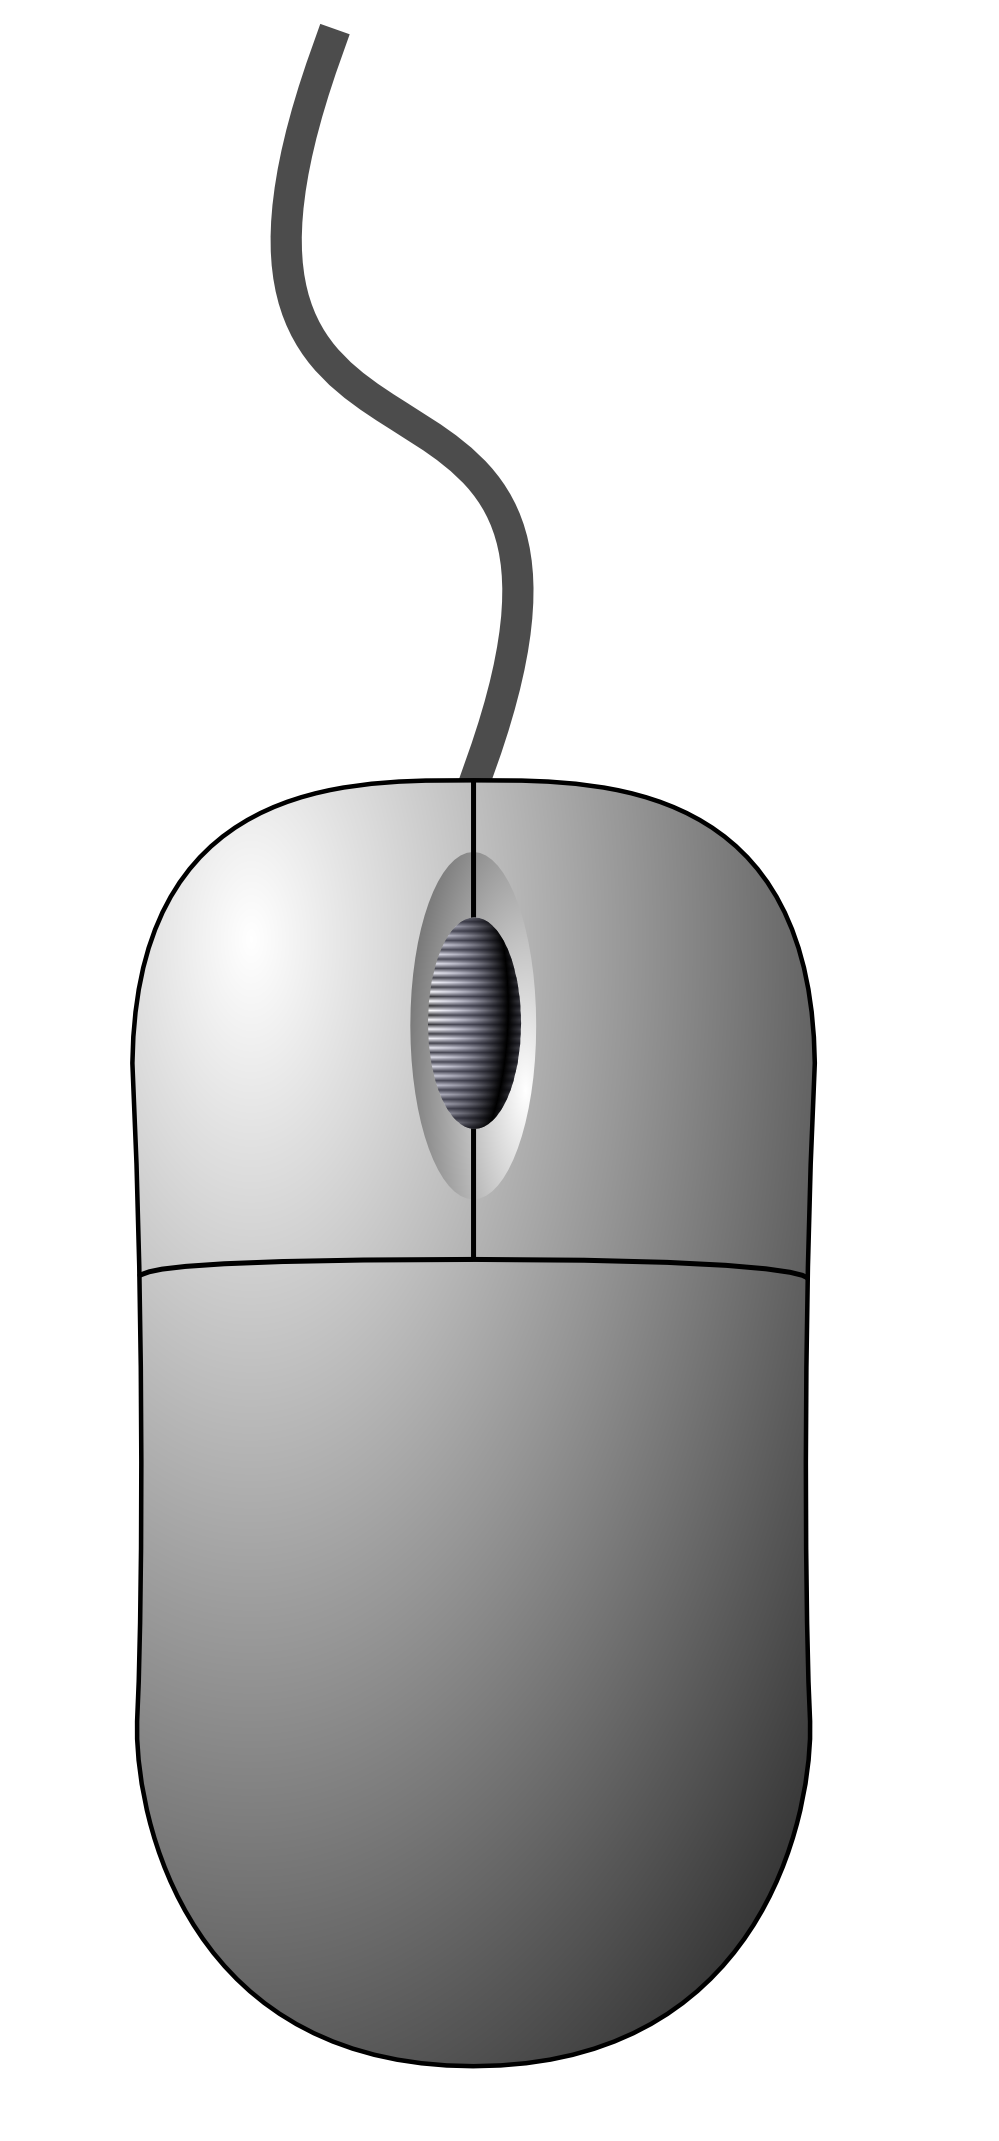 PC computer mouse PNG images free download